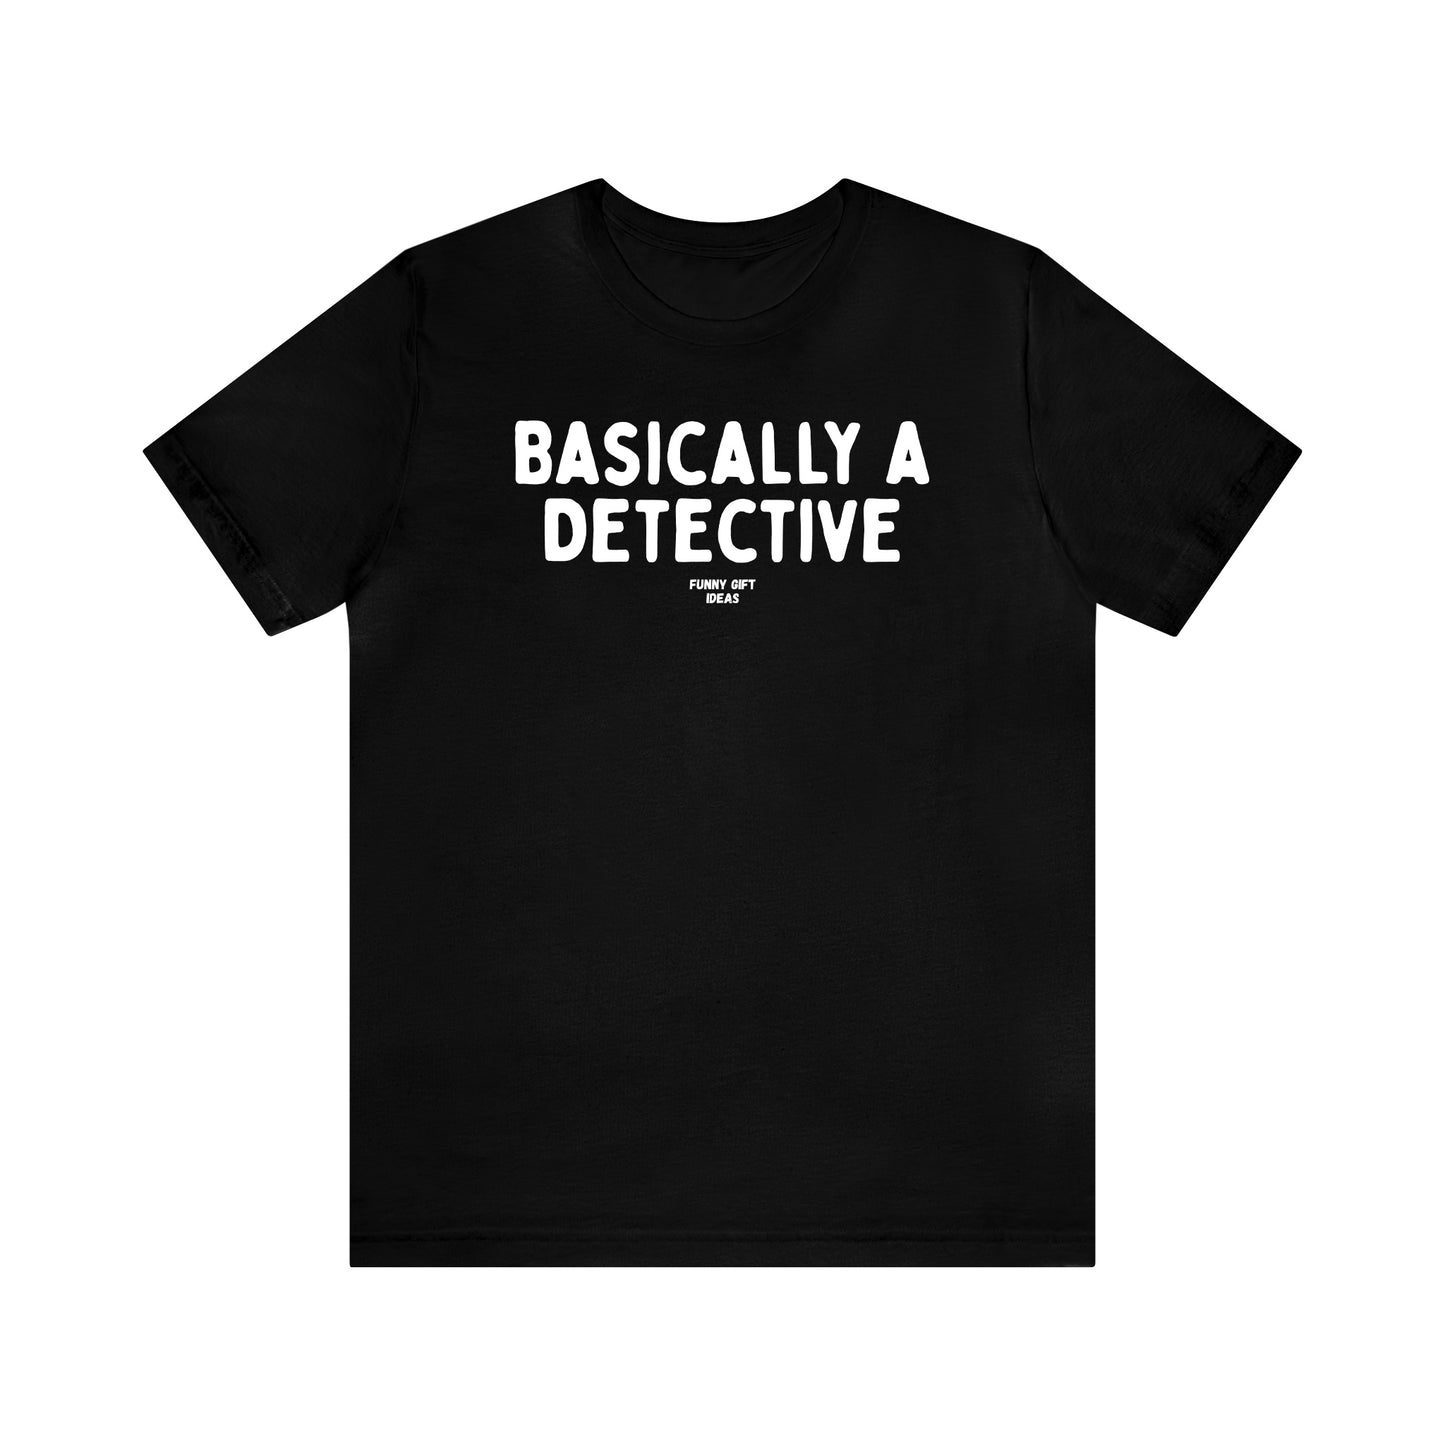 Funny Shirts for Women - Basically a Detective  - Women's T Shirts